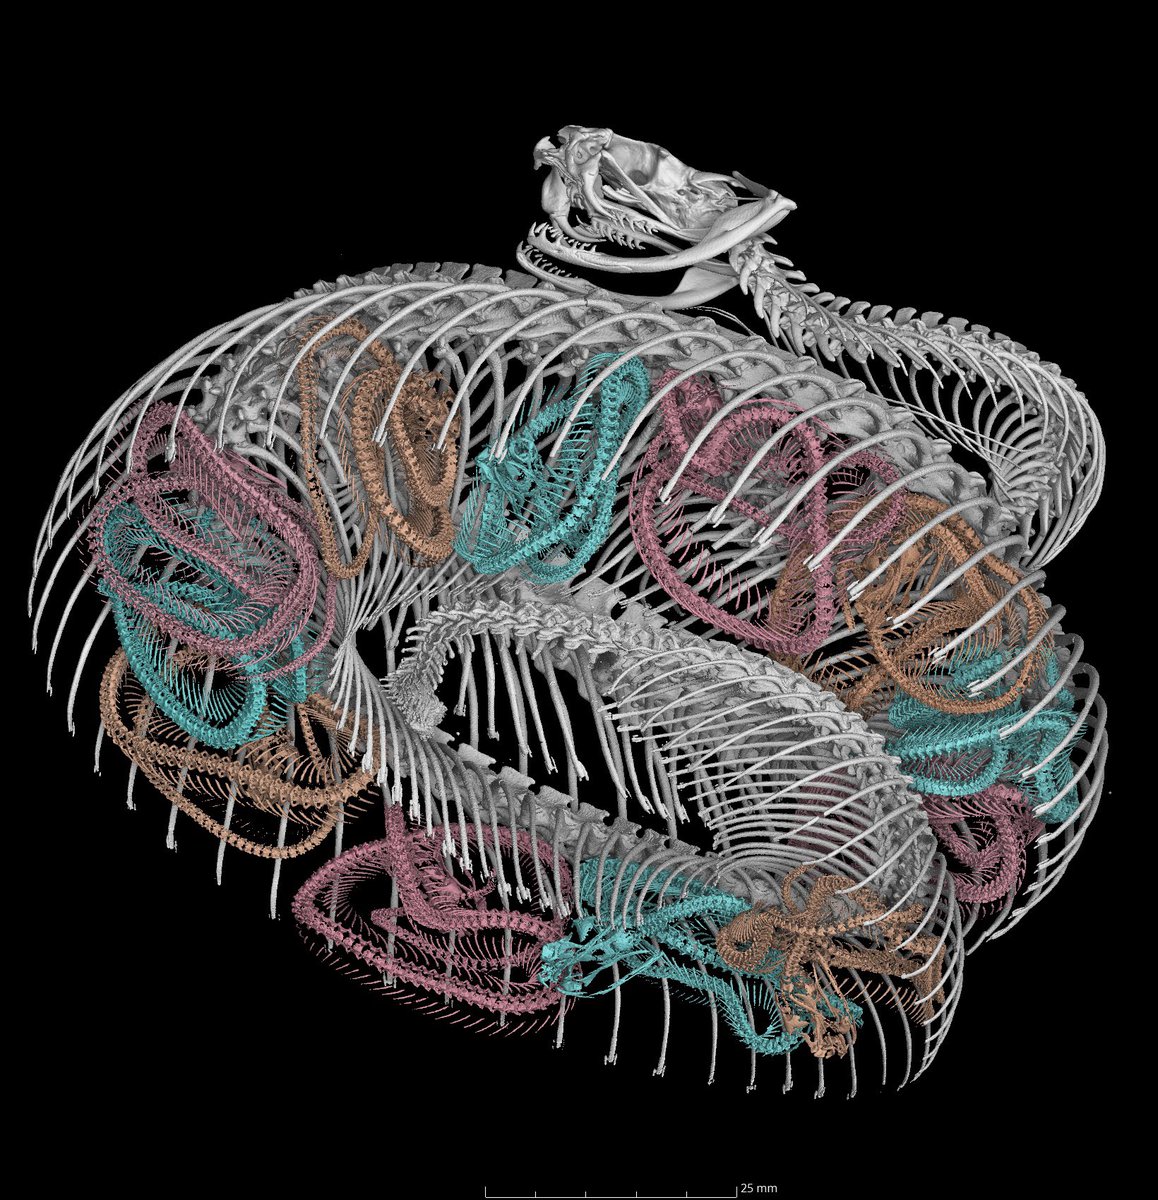 I’d like to take a moment to share a CT scan of my favorite specimen in the entireUMMZ - - a 100 year old mama Massasauga rattlesnake with 12 little pups perfectly coiled inside. I love her. 🐍💜. #umicheeb #ssar2024 #ctscan